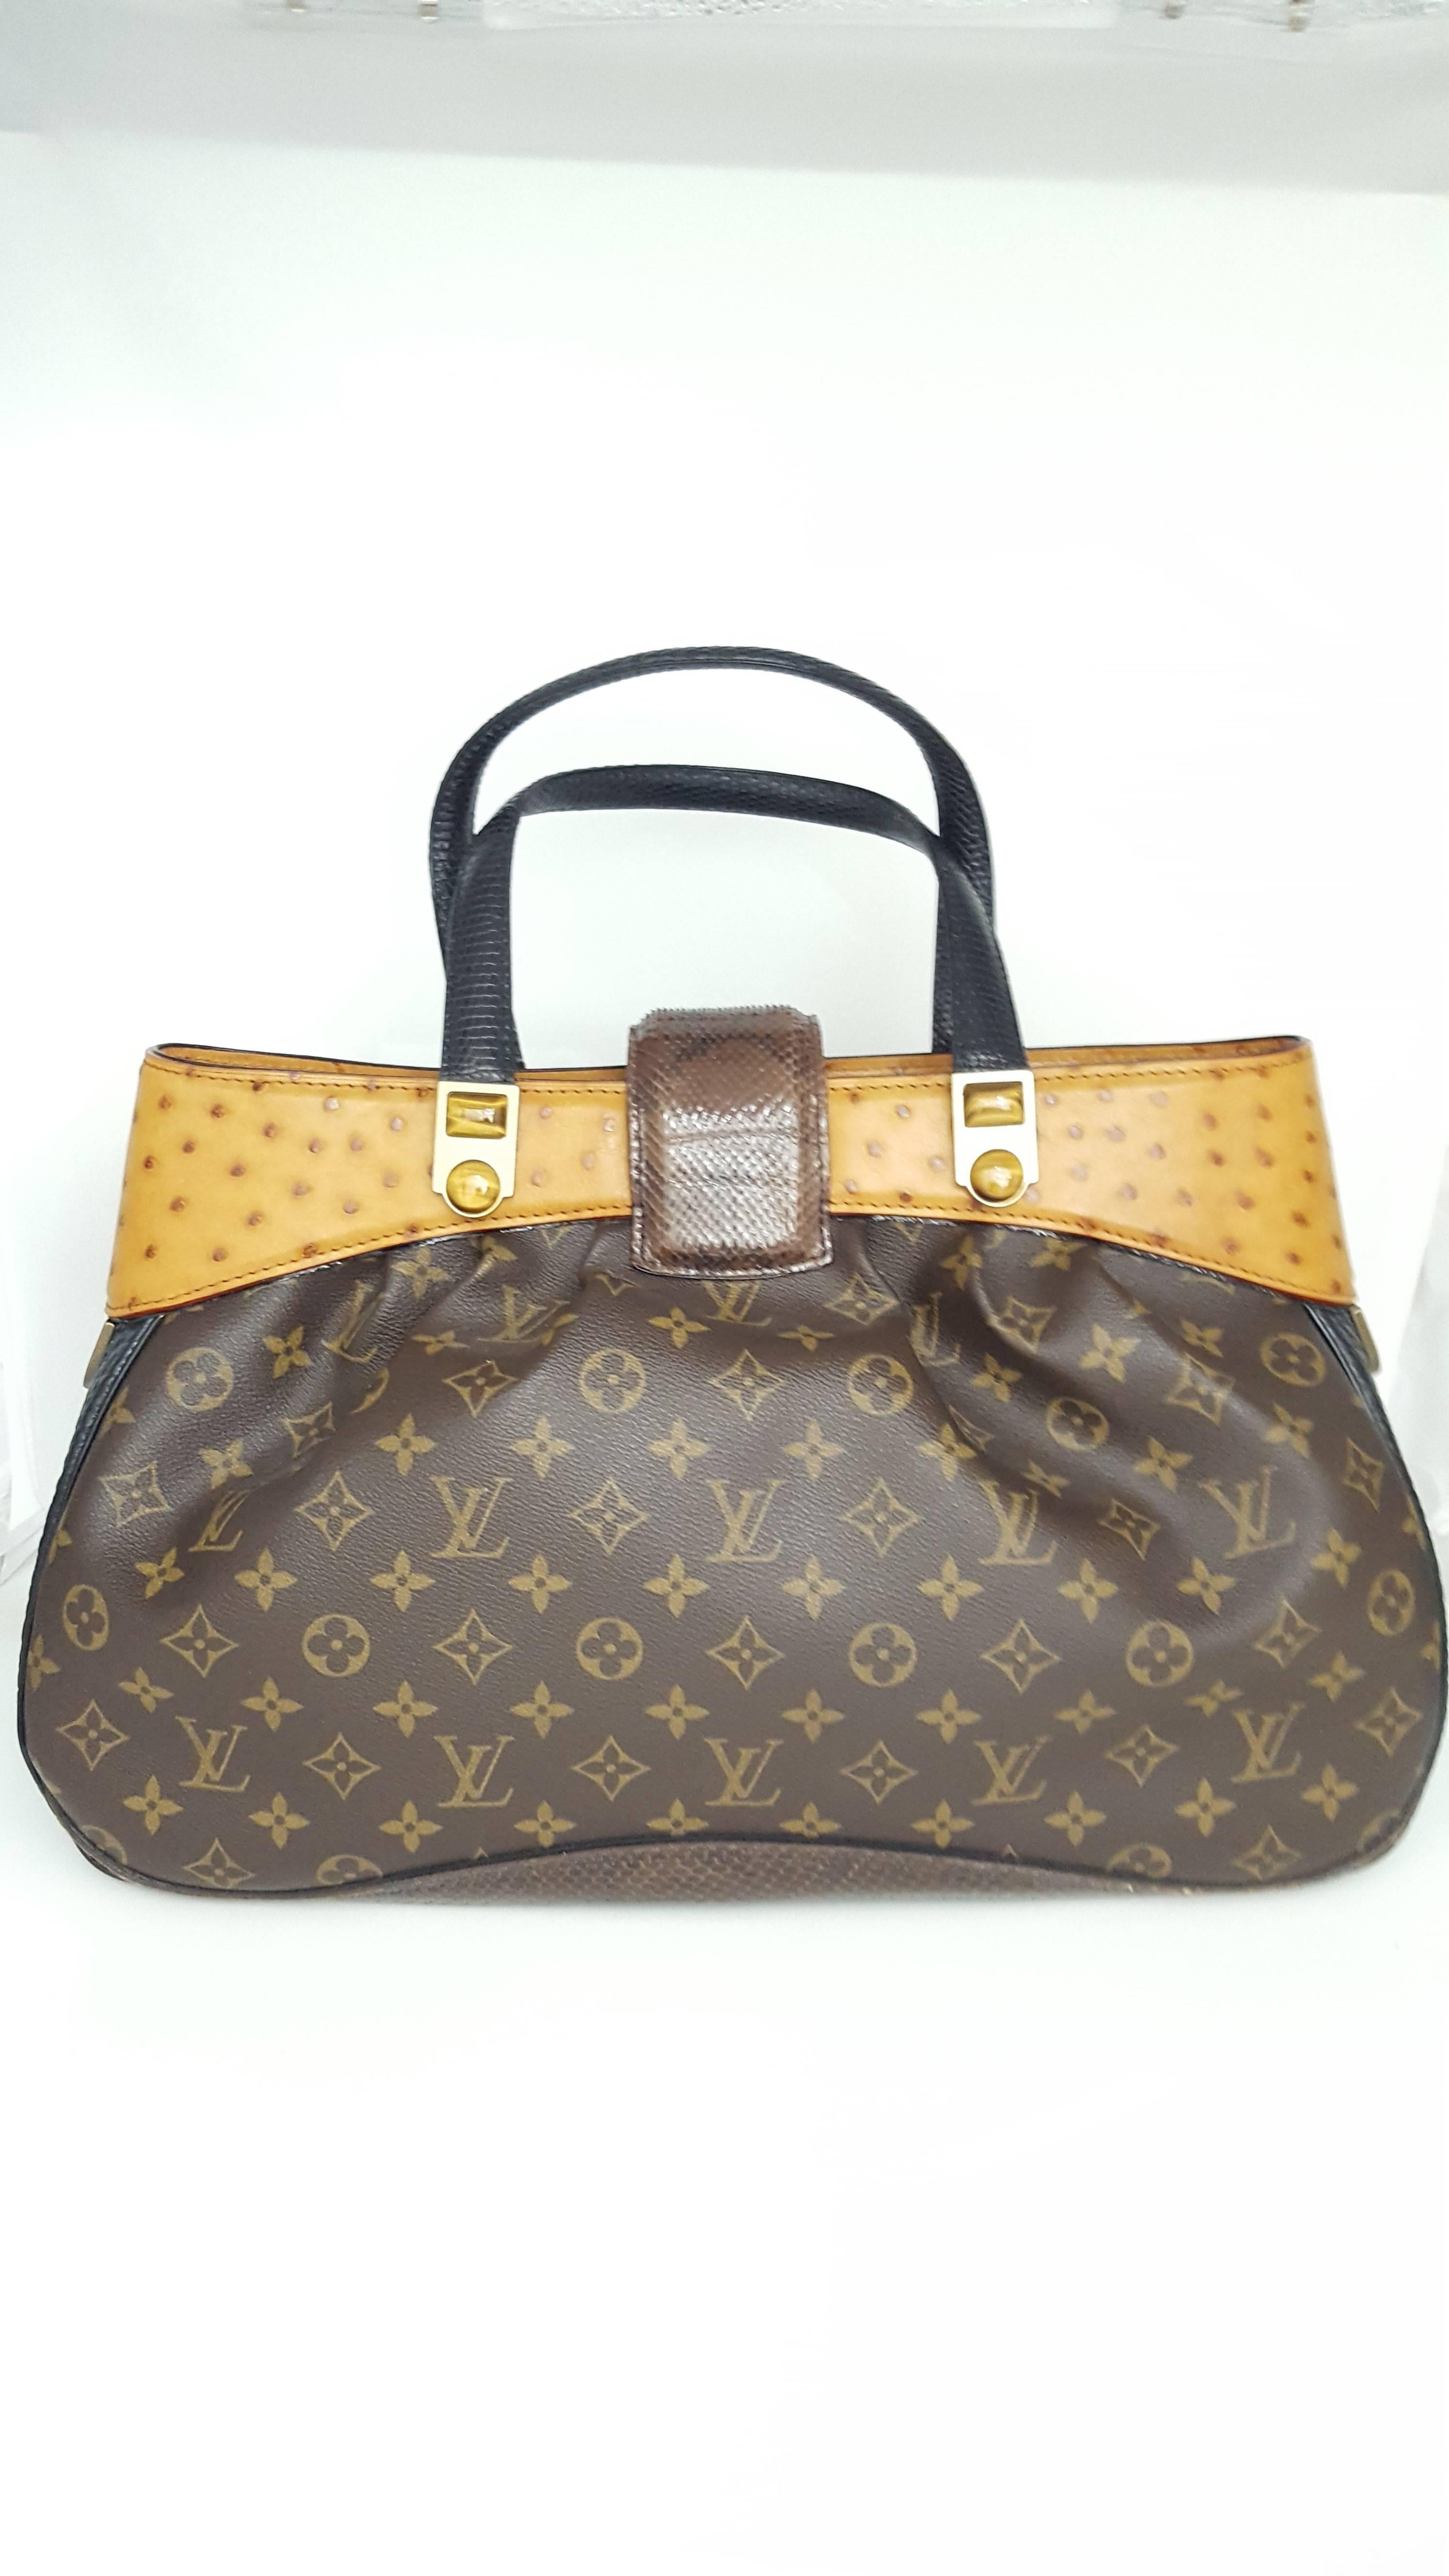 Offered for sale is this fabulous Louis Vuitton designed by Marc Jacobs for the 2005-2006 show.  It is the Oskar Waltz.  This bag was never carried and is in new condition.  With its supple pleats and the use of three exotic skins, Ostrich, Lizard,